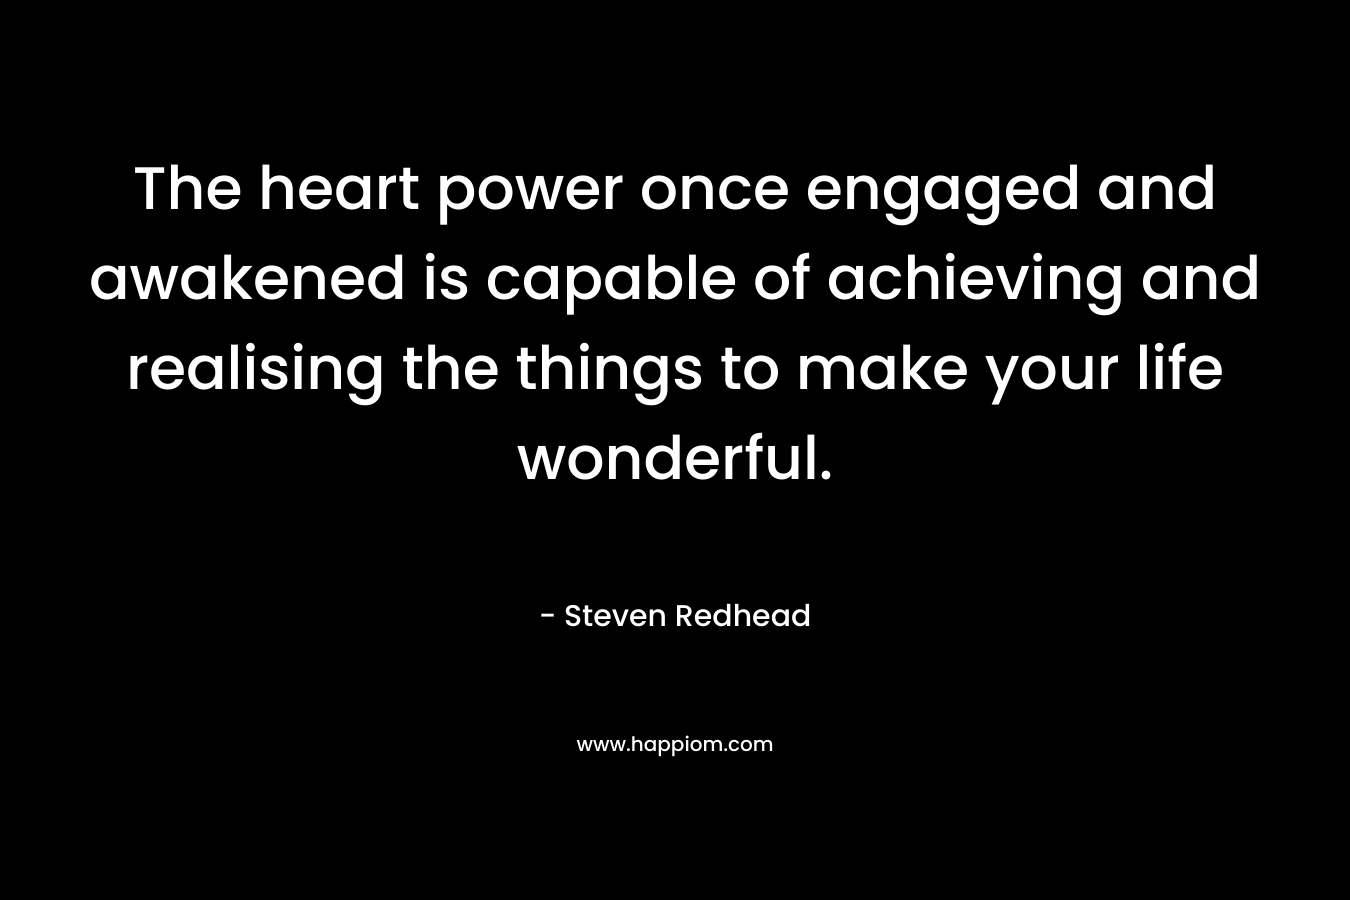 The heart power once engaged and awakened is capable of achieving and realising the things to make your life wonderful. – Steven Redhead